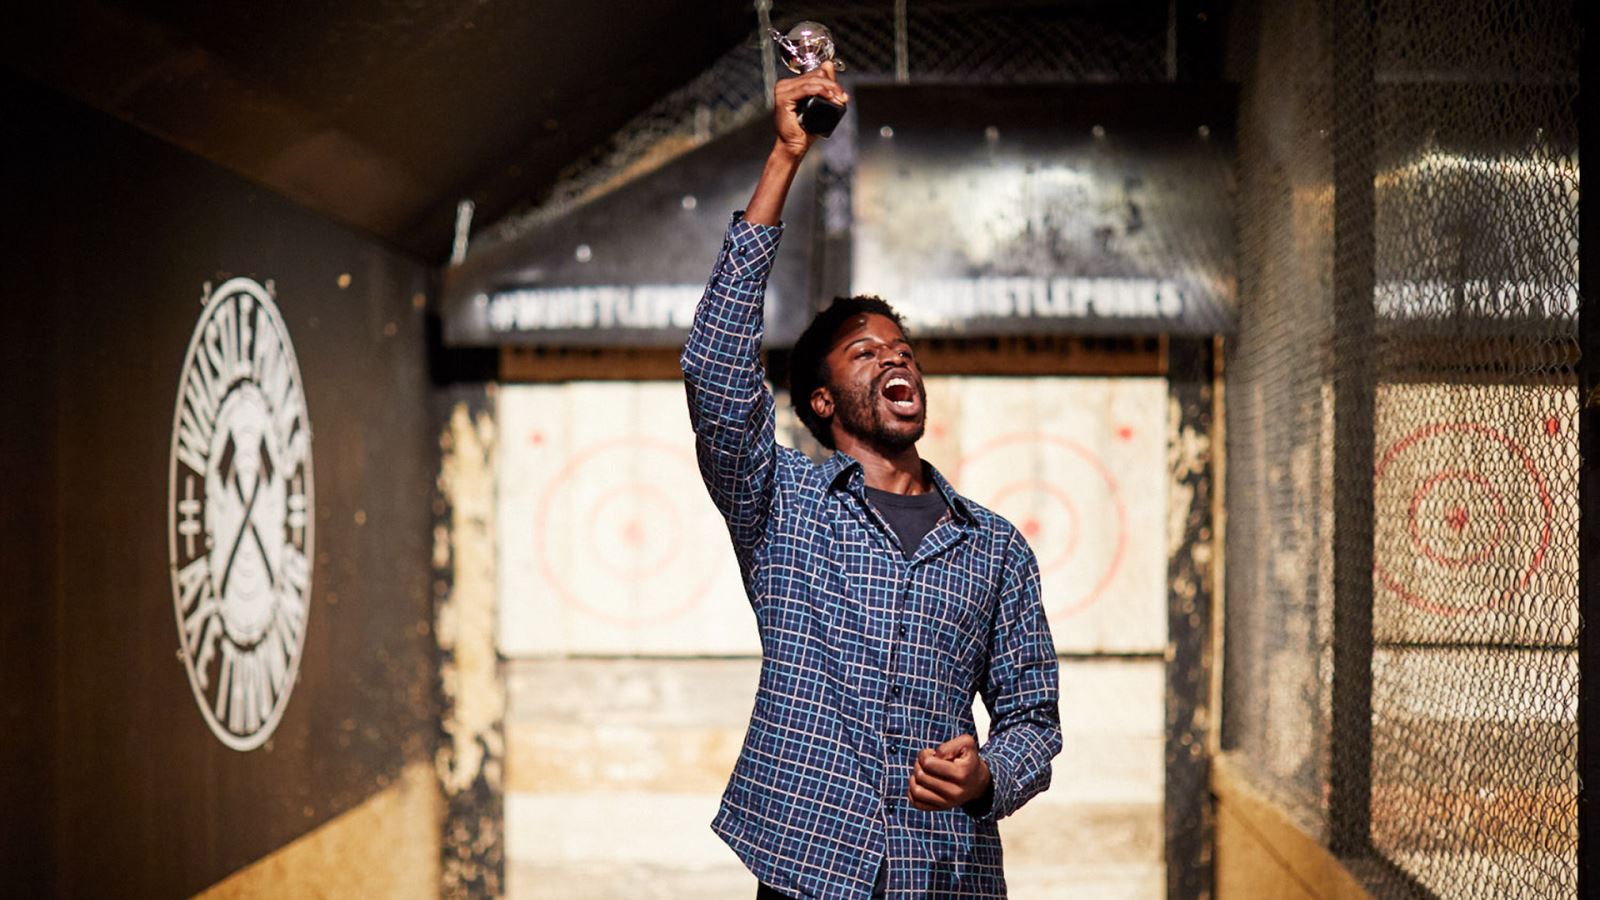 Man holding trophy in the air at Whistle Punks axe throwing Bristol